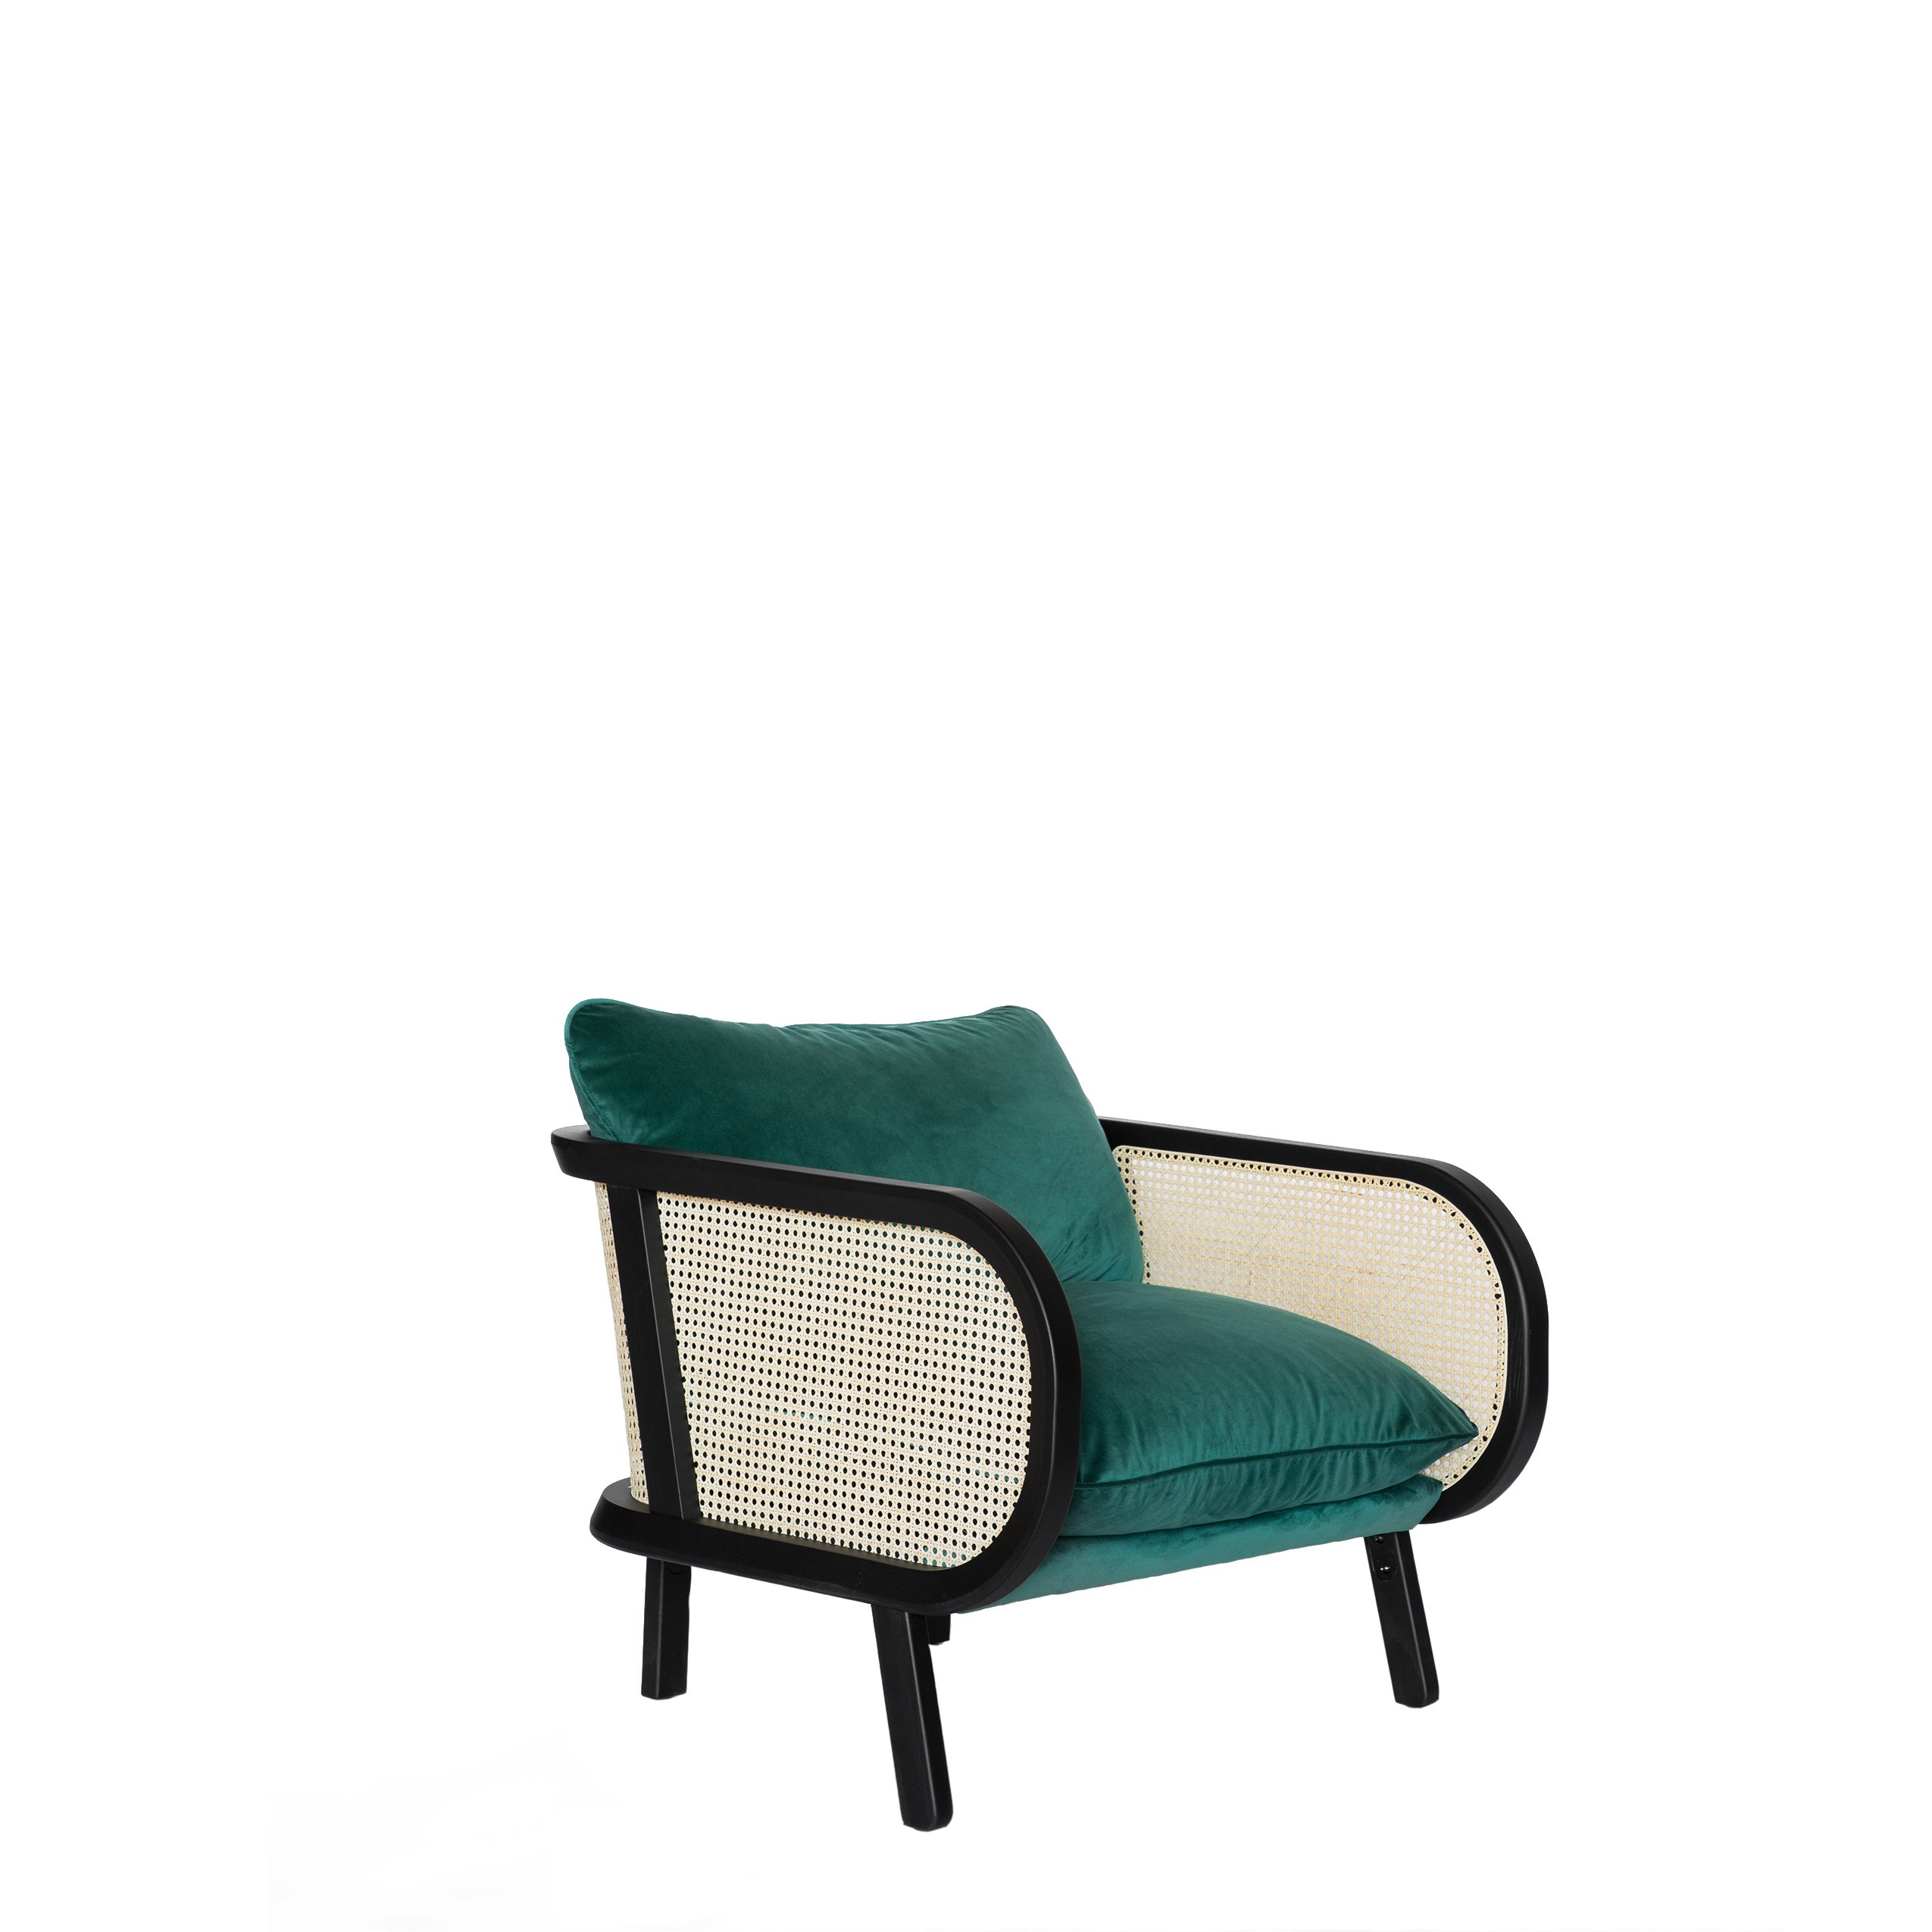 Haworth Buzzicane lounge chair in green color, side view